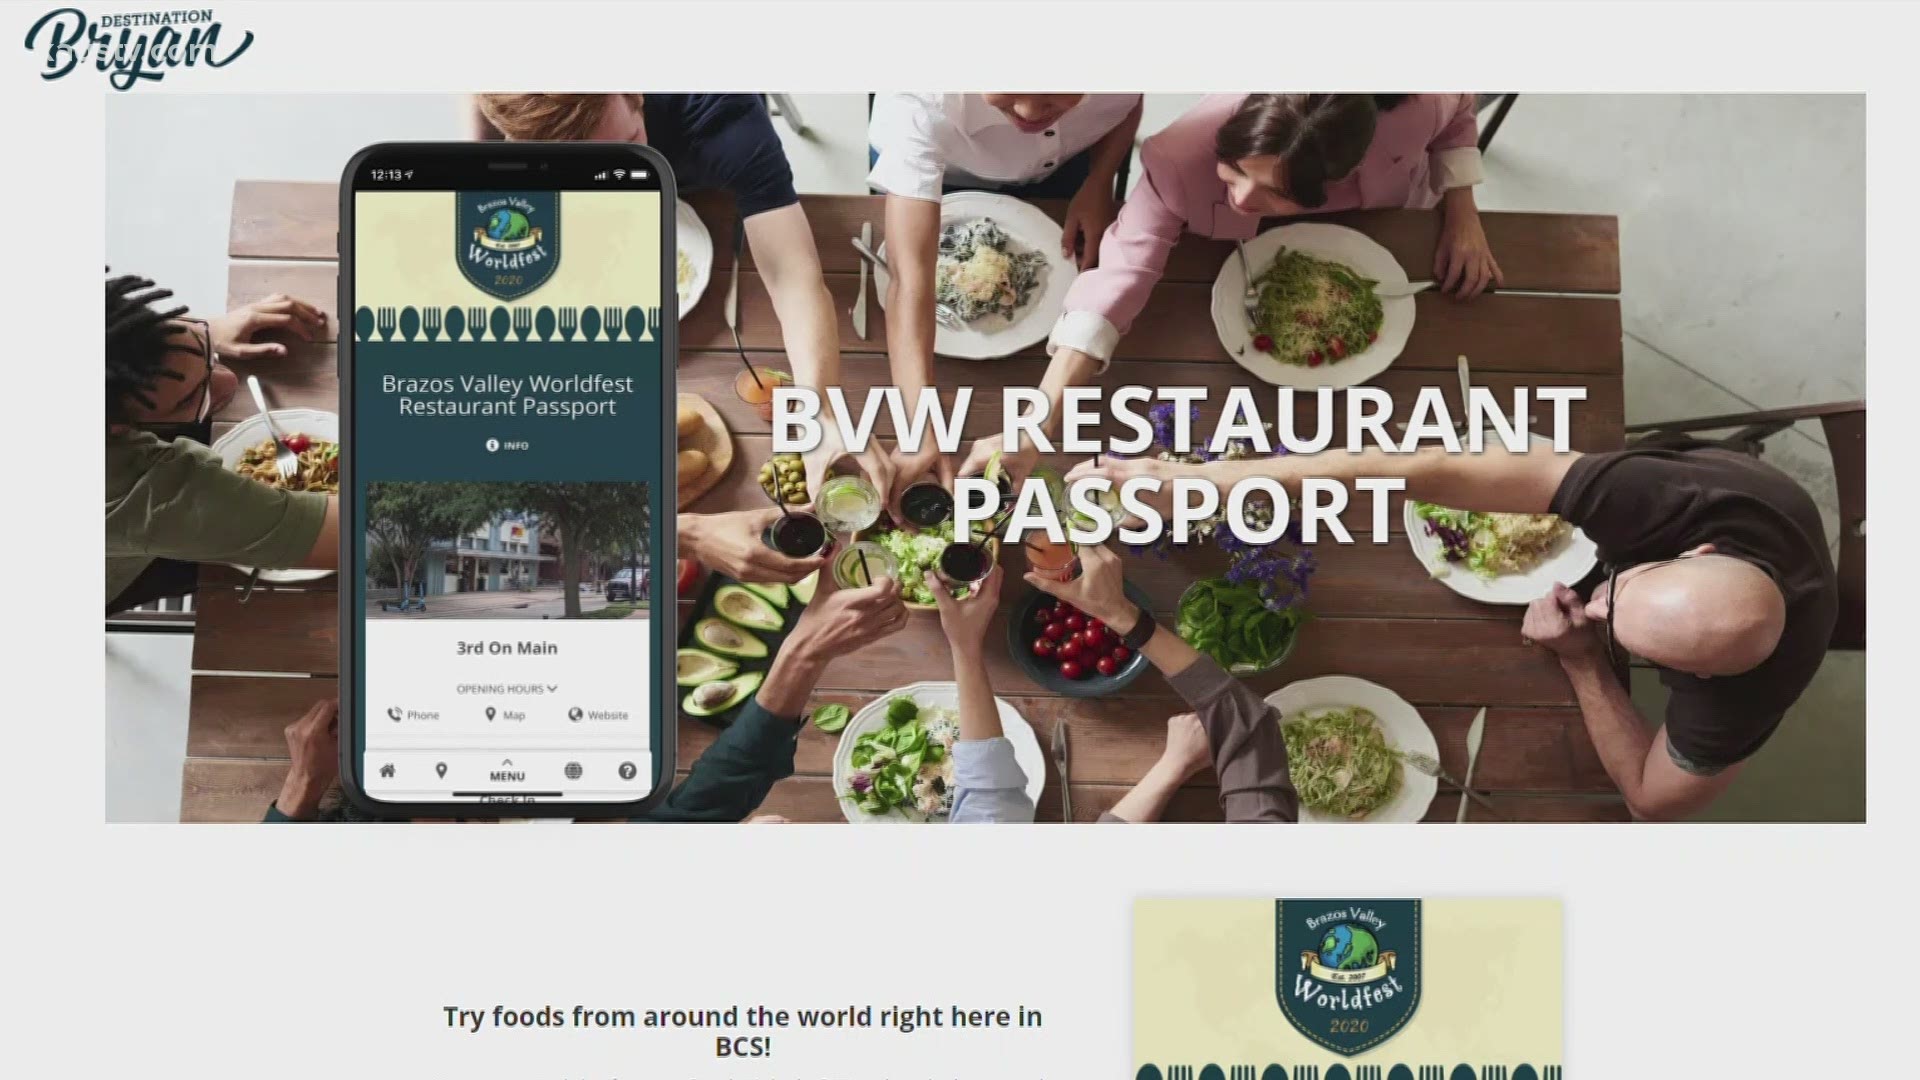 You can download the Worldfest passport on your phone and receive deals from participating local restaurants in Bryan.